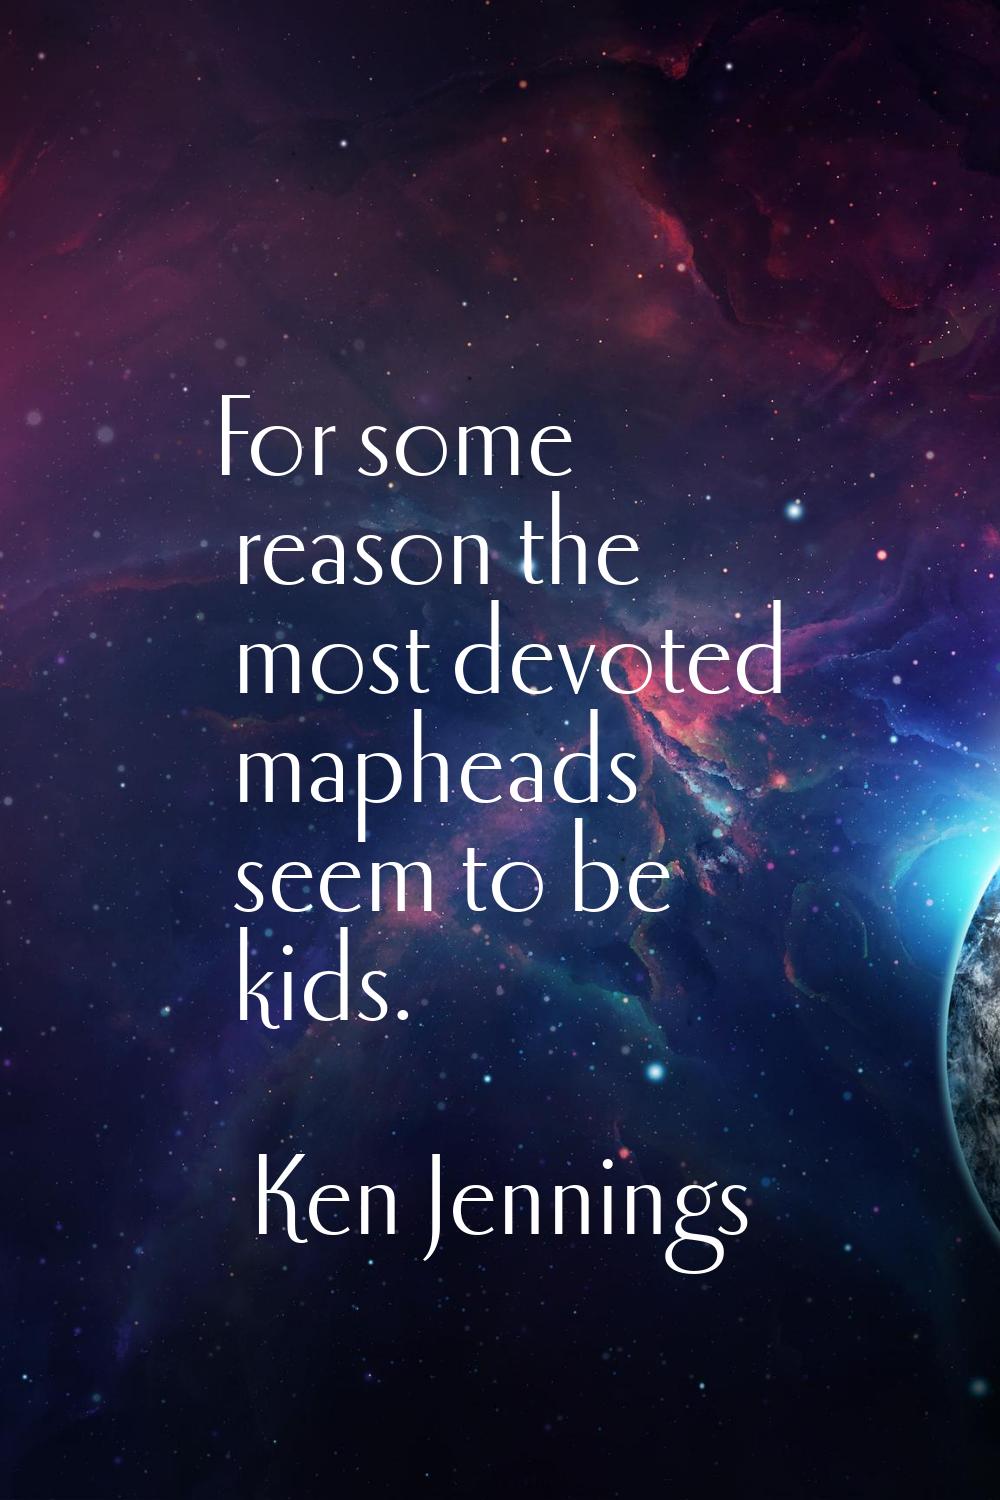 For some reason the most devoted mapheads seem to be kids.